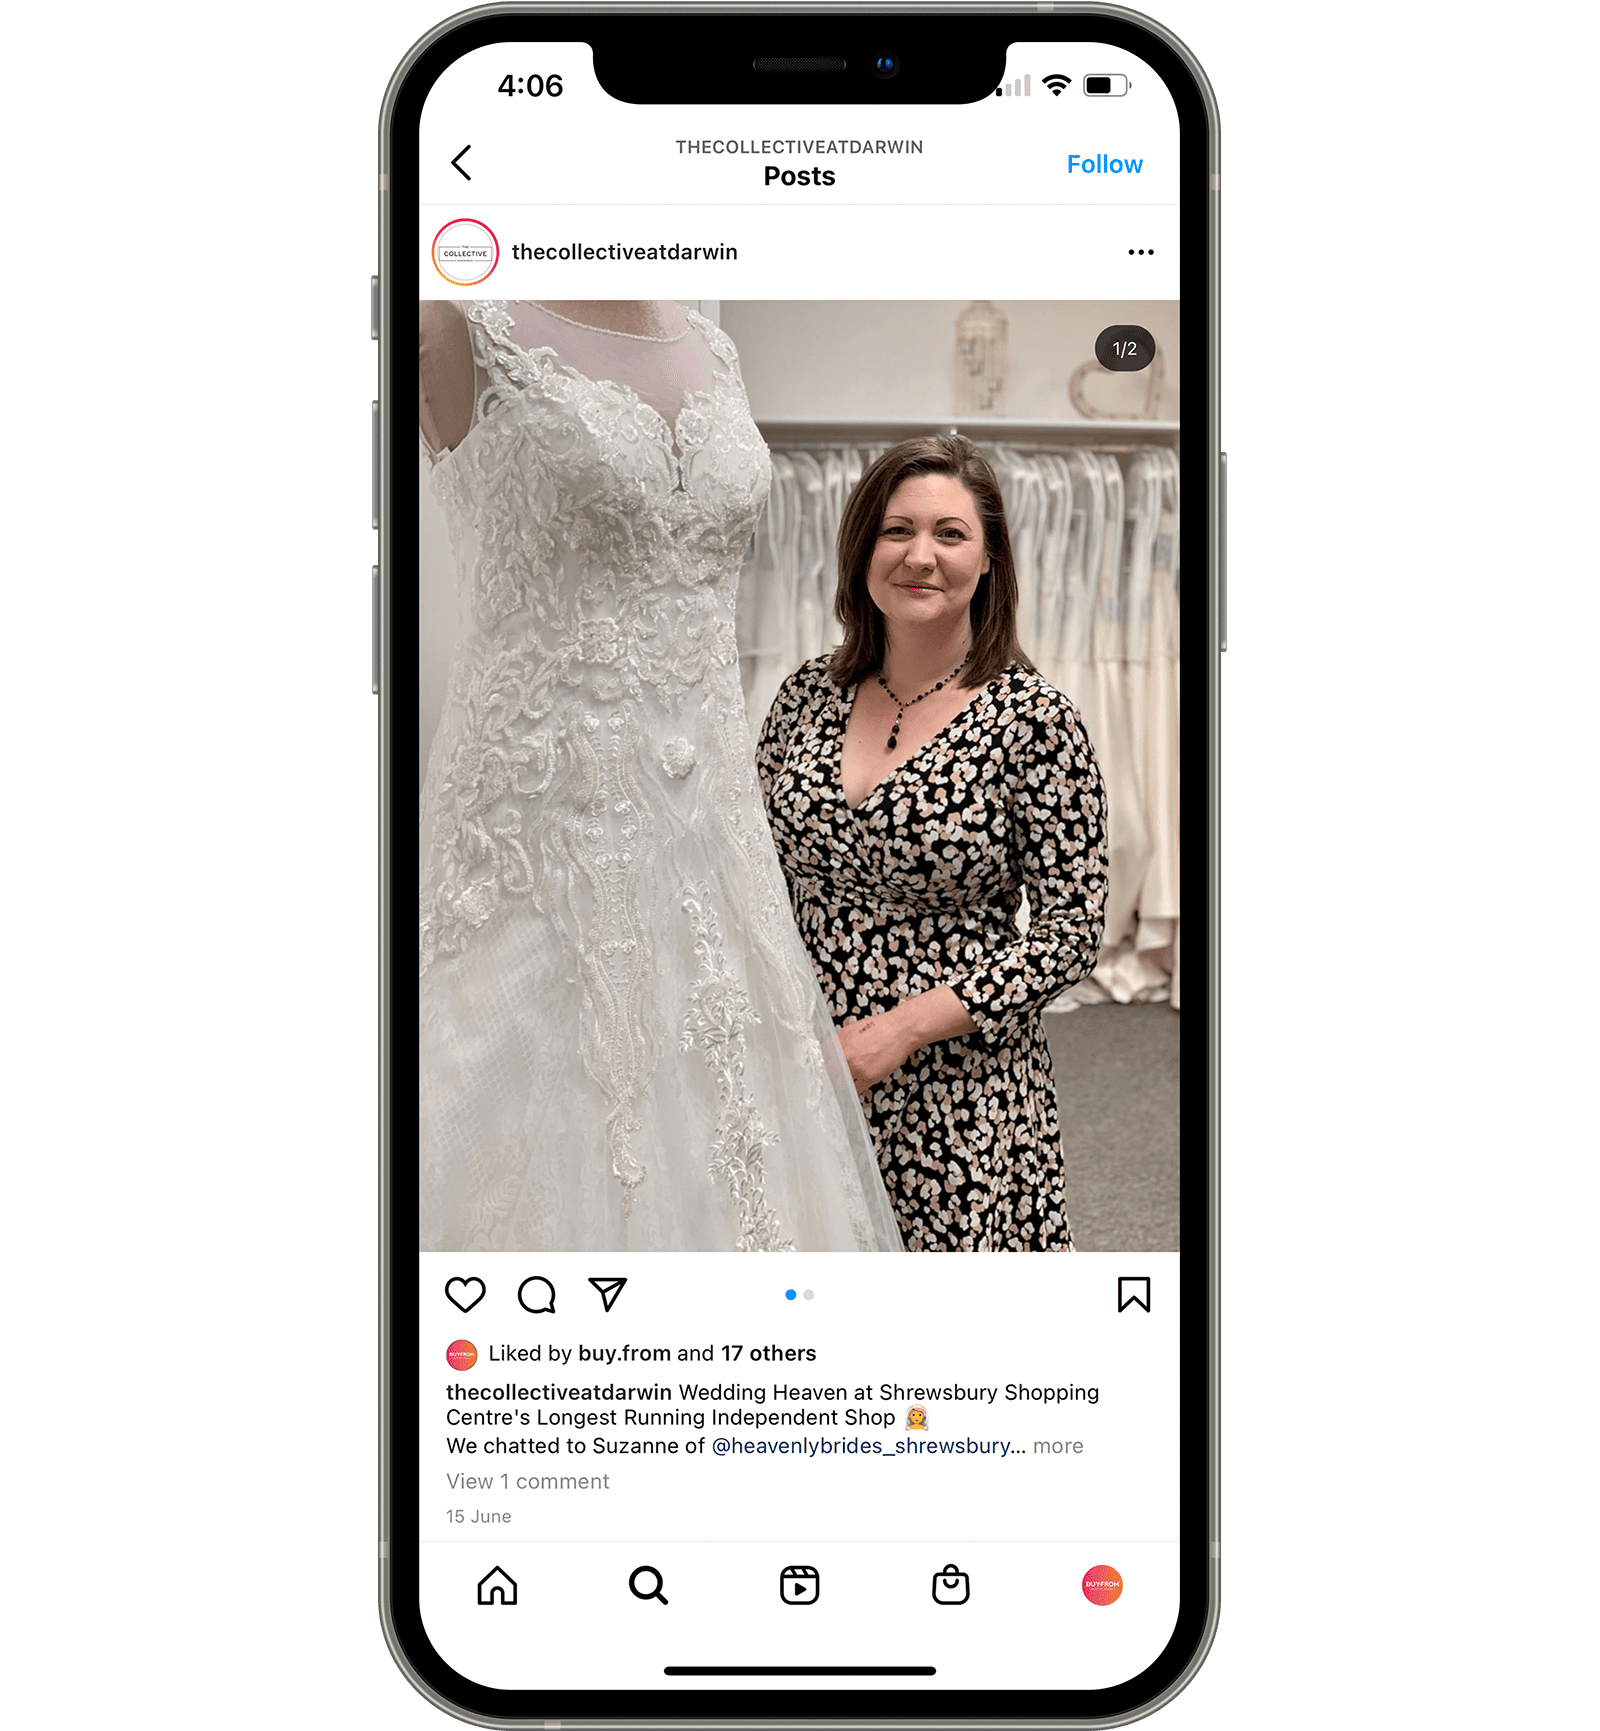 Social media post of lady with wedding dress from The Collective